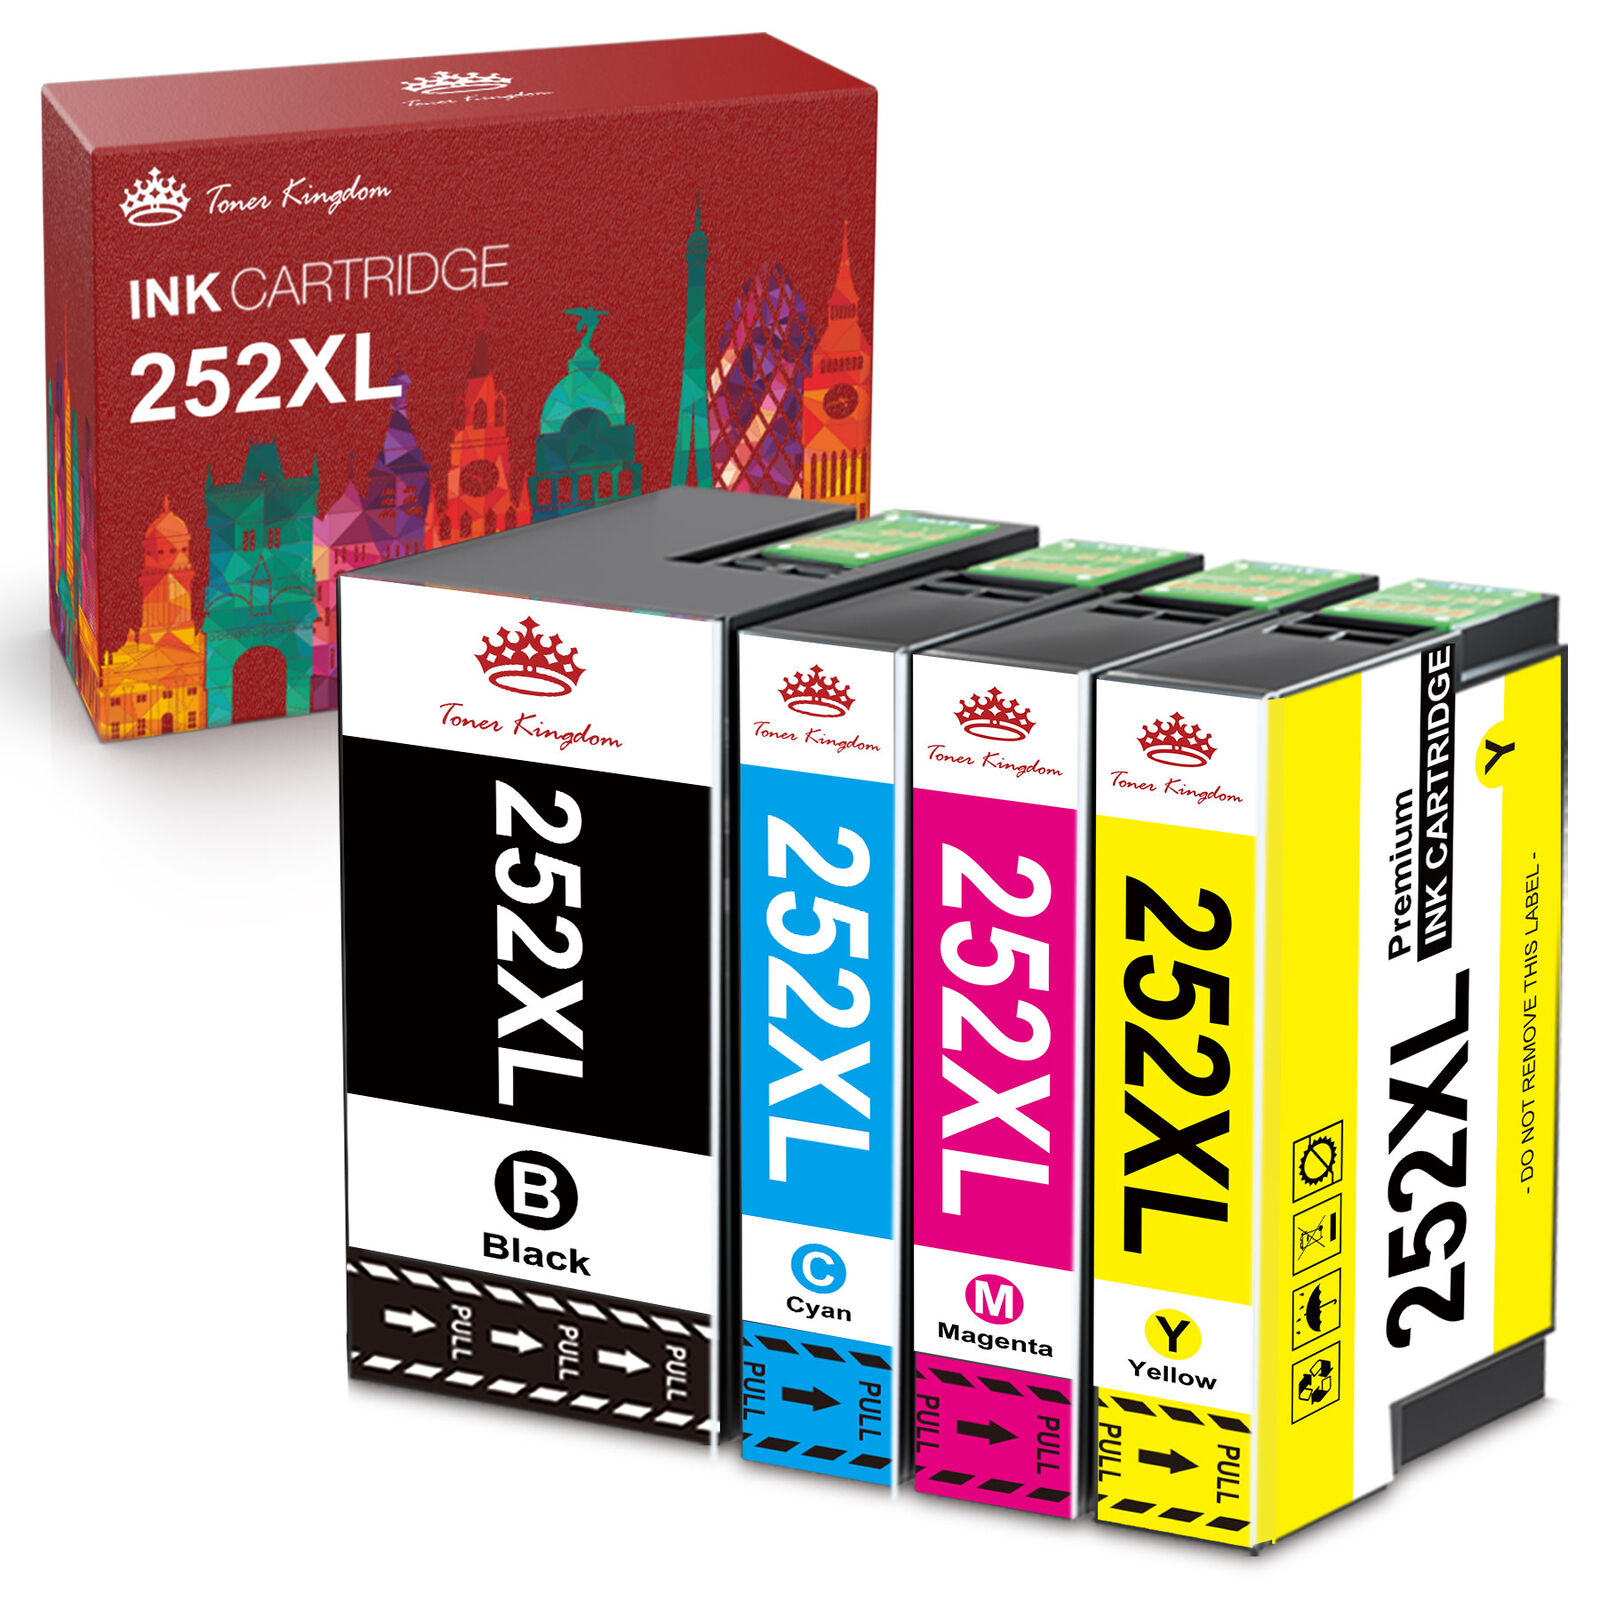 4-10PK 252 XL T252XL Ink Replacement for Epson WorkForce WF-7620 WF-7710 WF-7720